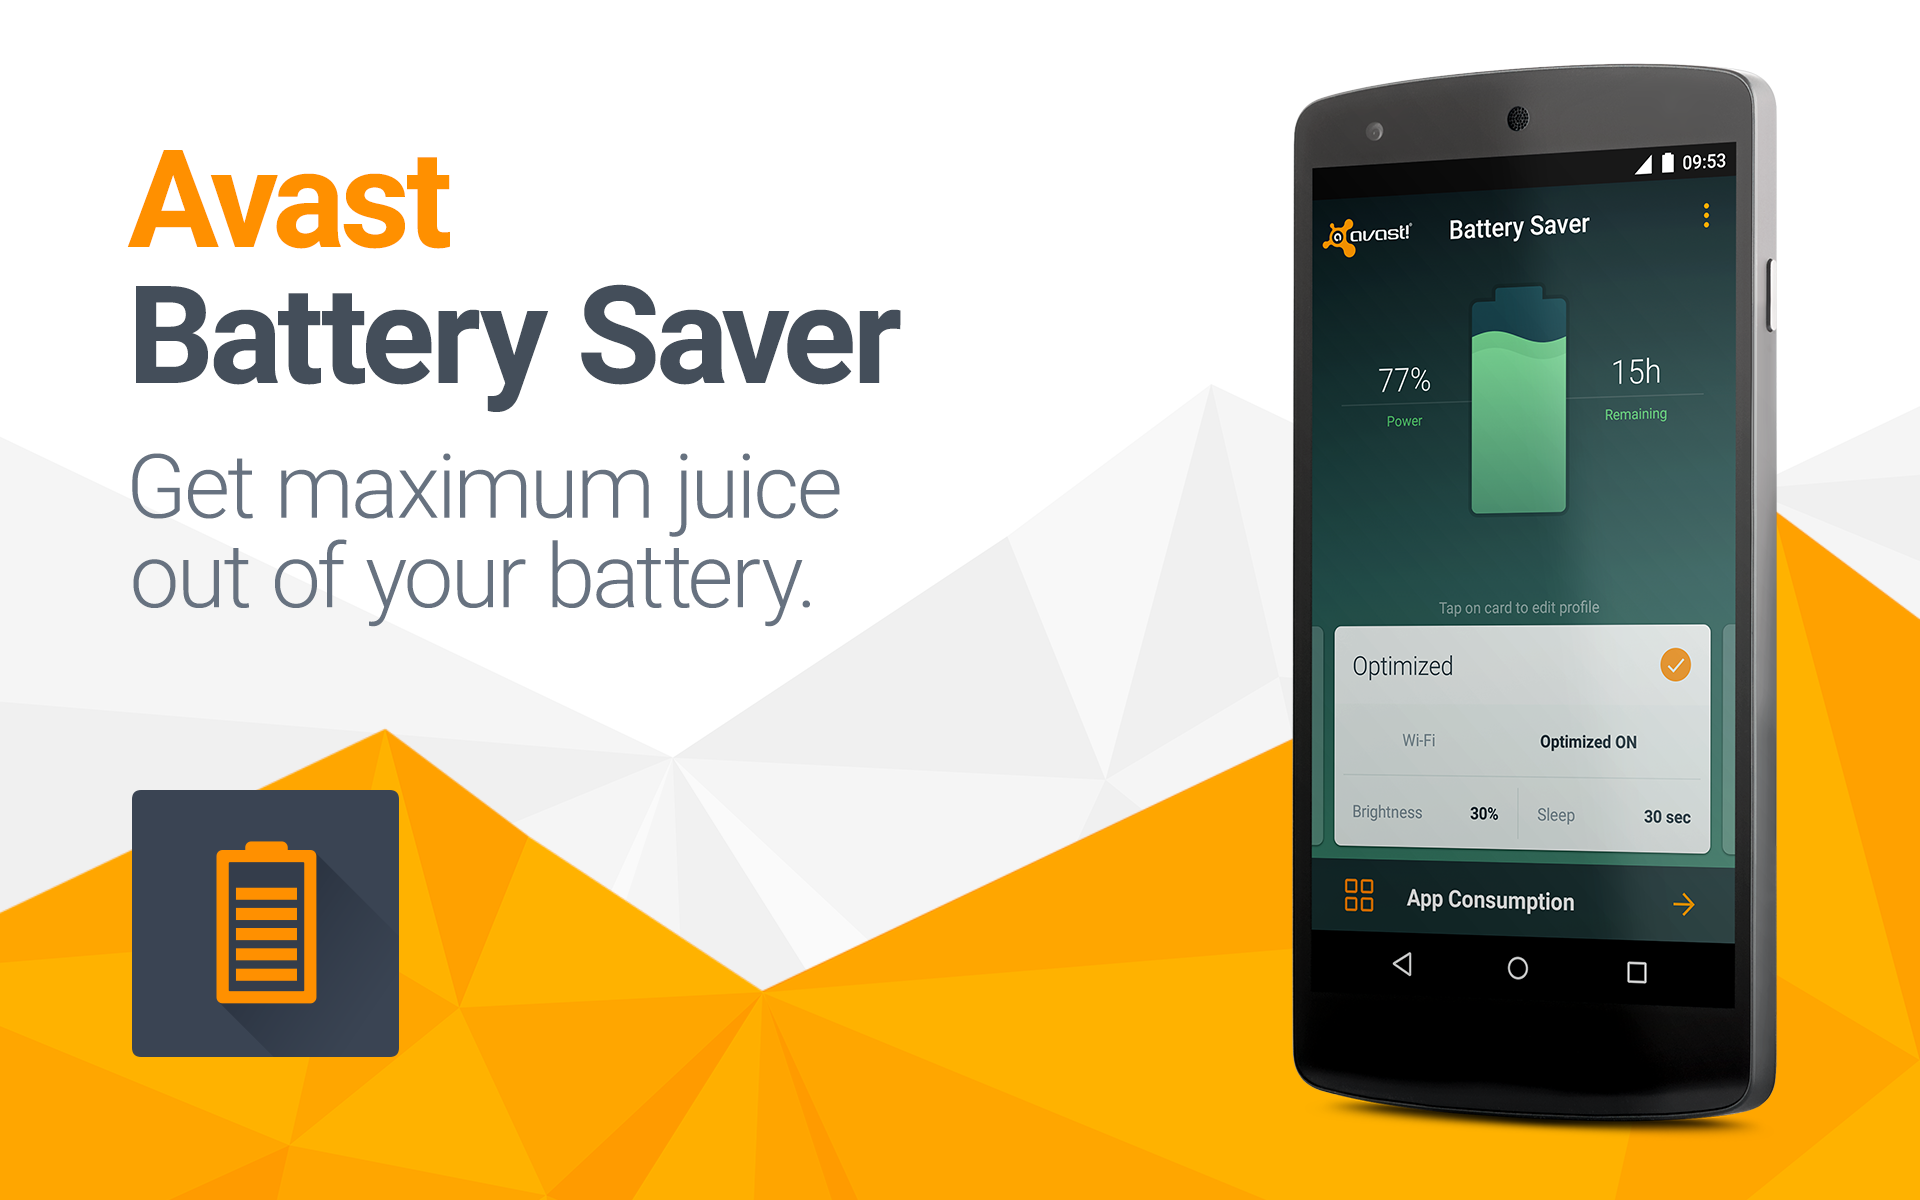 Aavst Battery Saver saves battery power.